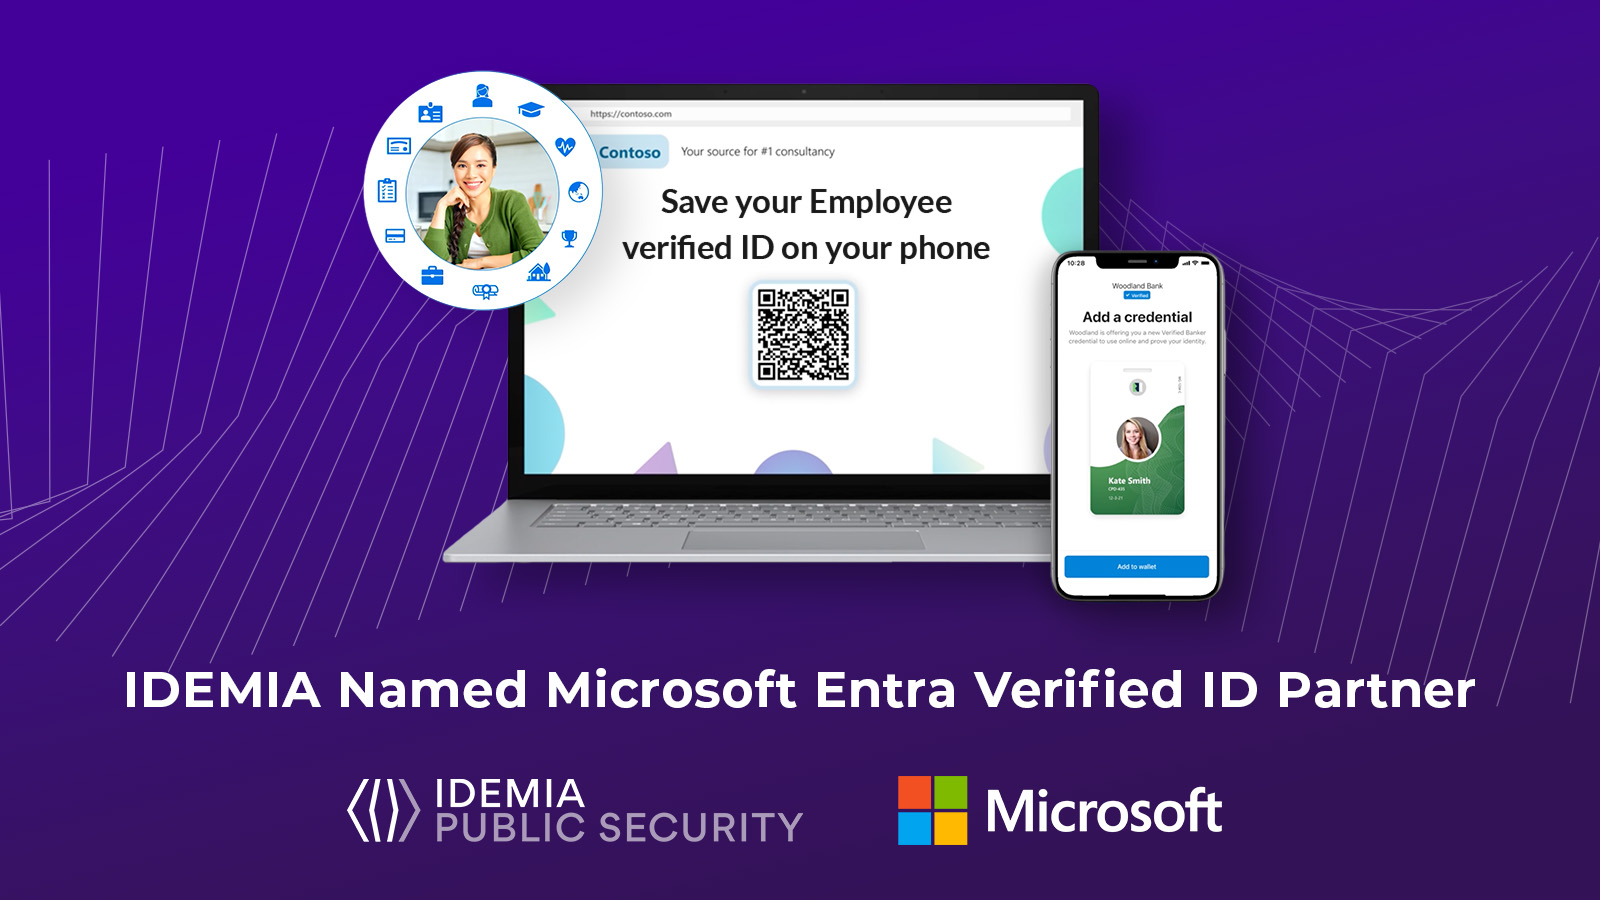 IDEMIA Public Security Partners with Microsoft for Entra Verified ID